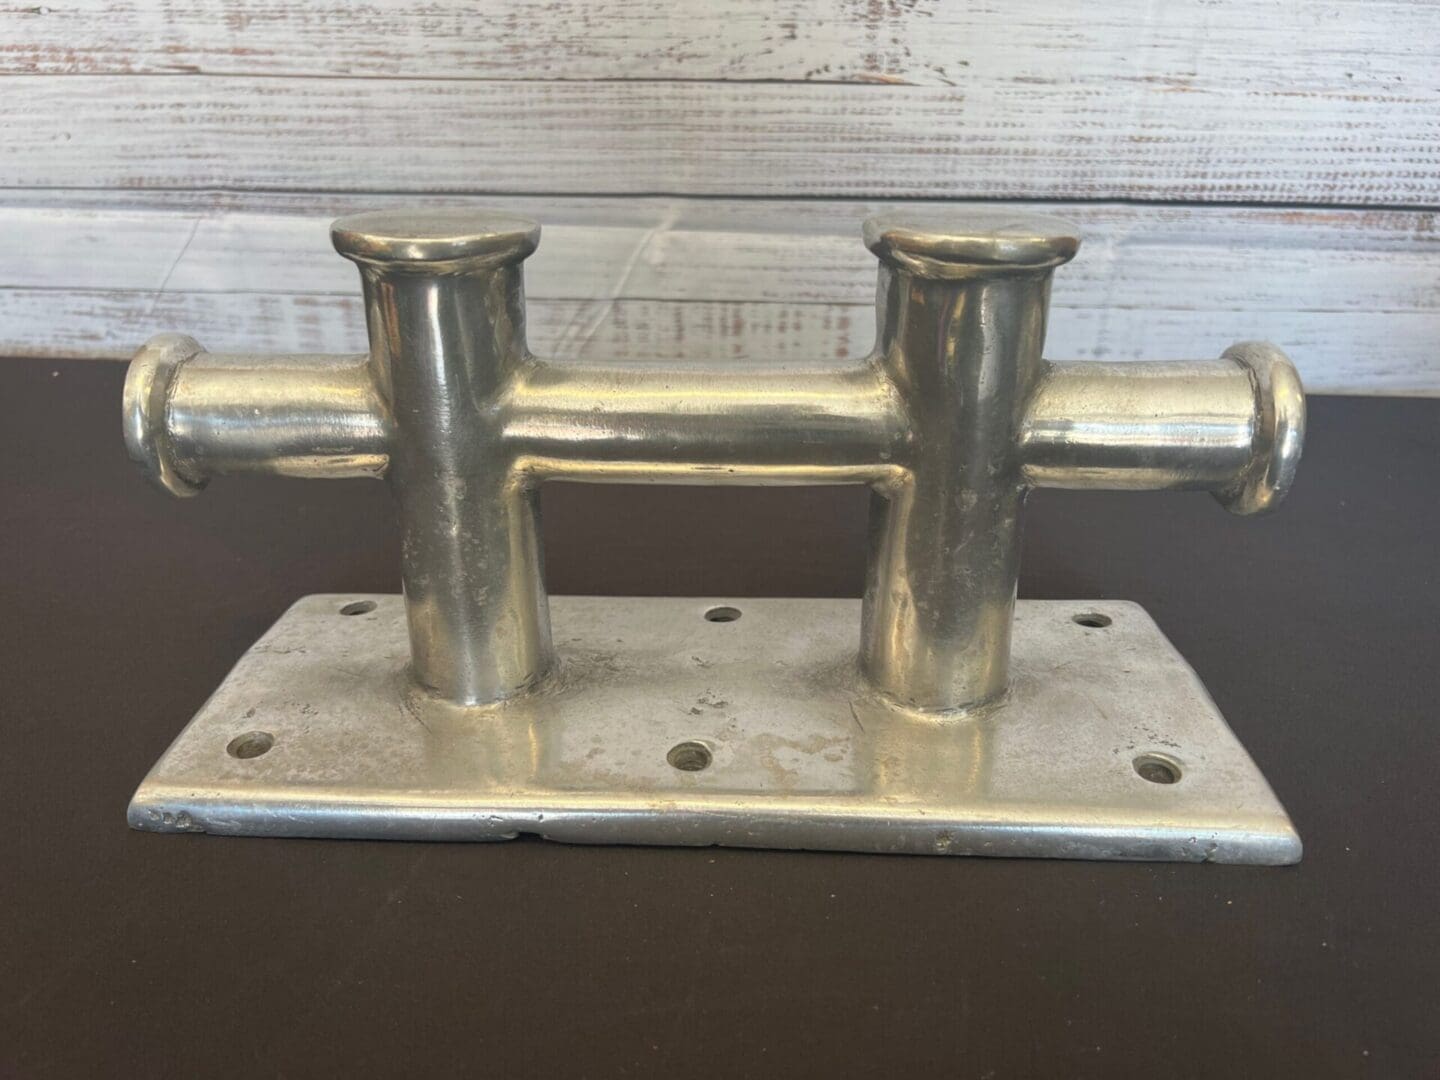 A metal object sitting on top of a table.